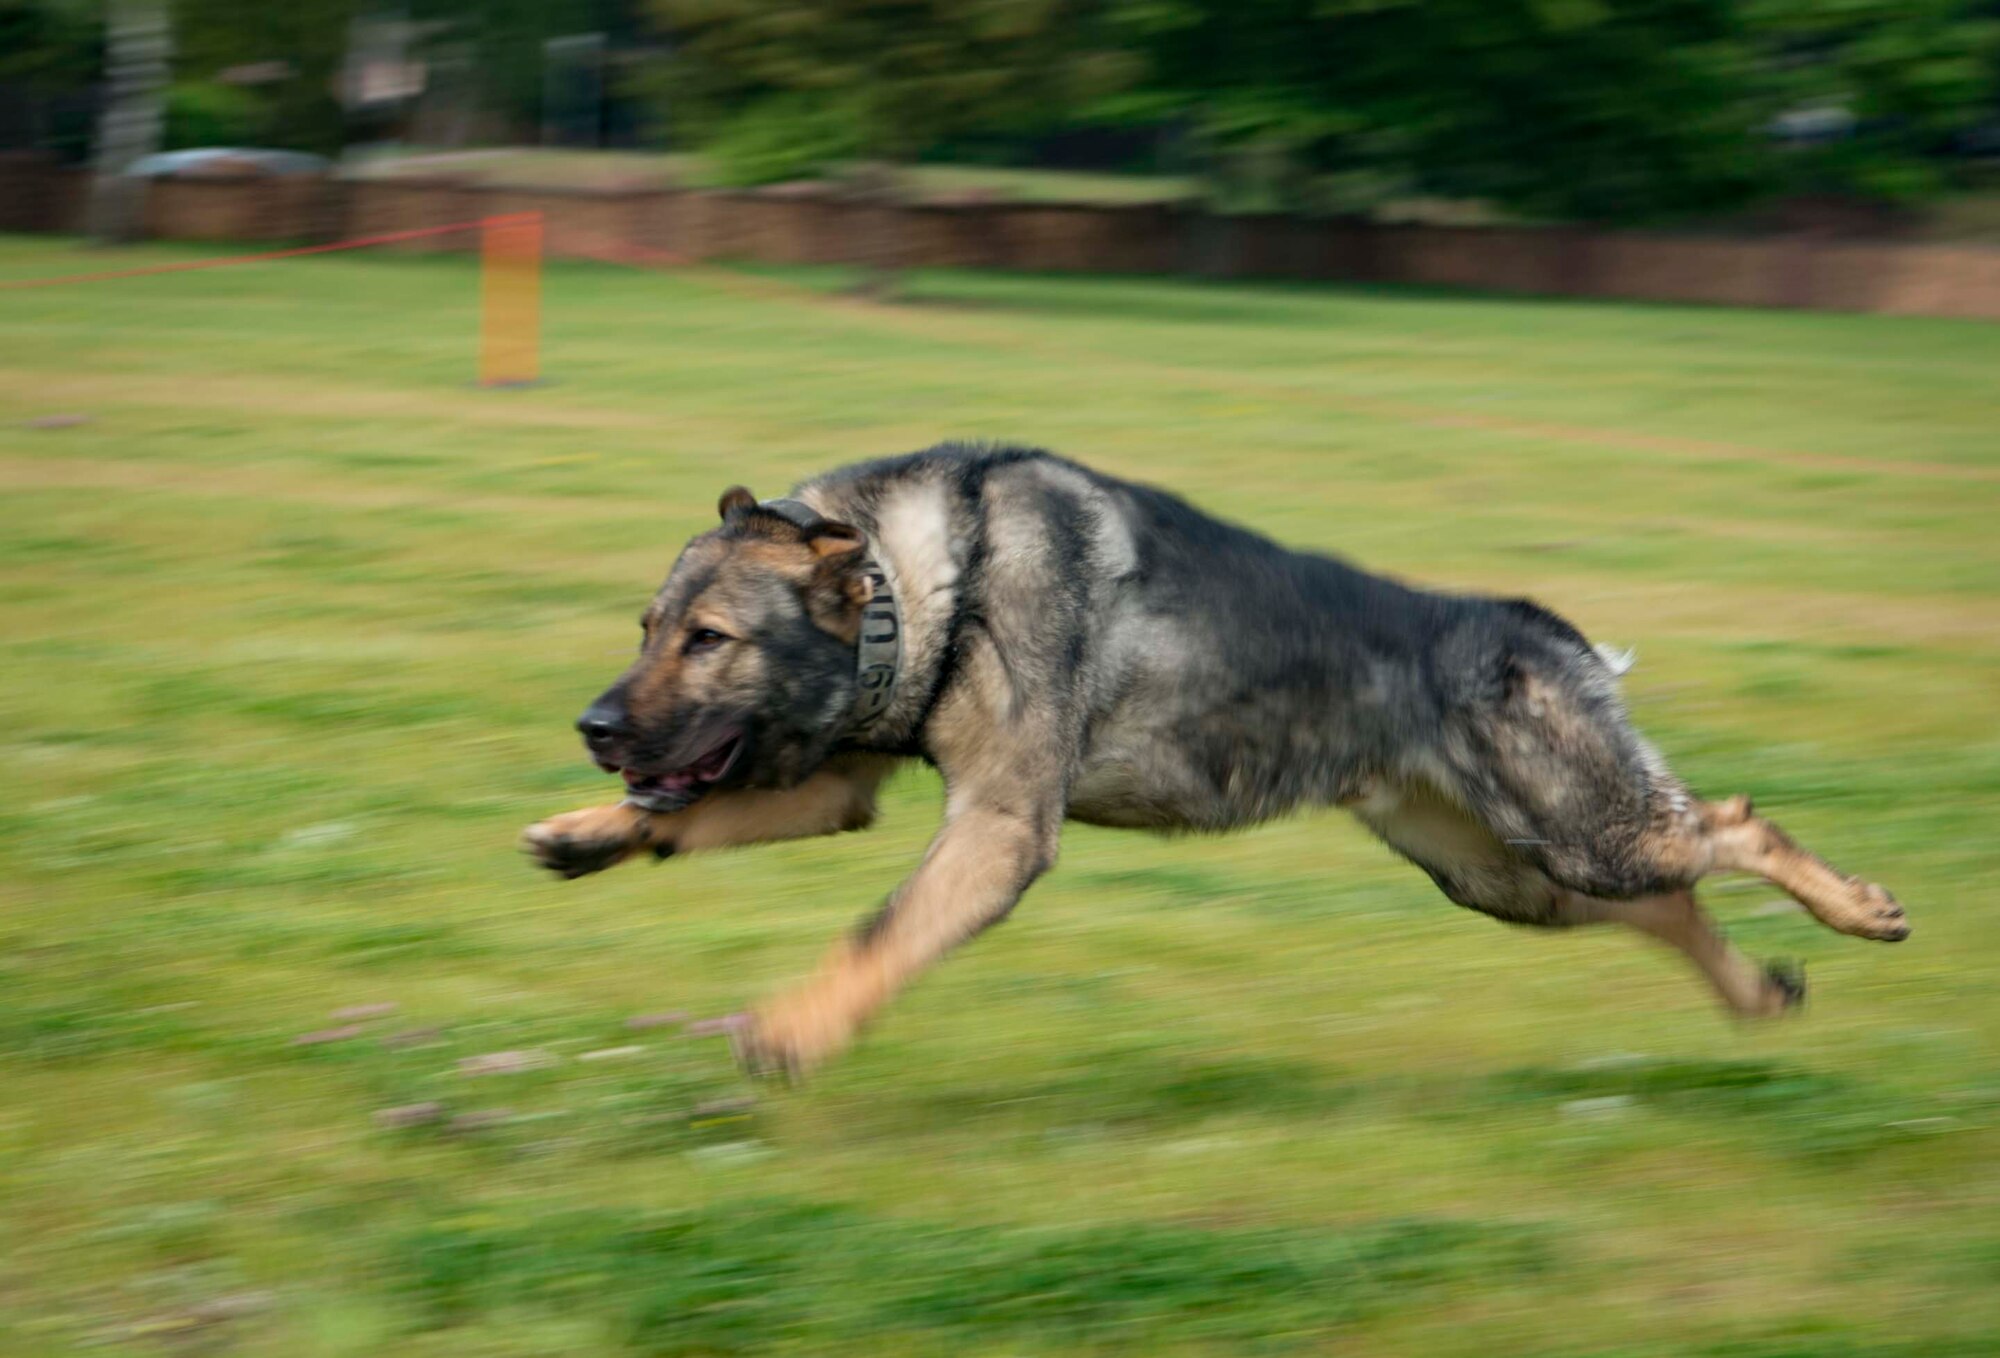 Kobo, 86th Security Forces Squadron military working dog, demonstrates his ability to apprehend an individual during Police Week 2018 on Ramstein Air Base, Germany, May 14, 2018. The demonstration was part of Police Week, which President John F. Kennedy began in 1962 to pay special recognition to those law enforcement officers who have lost their lives in the line of duty. (U.S. Air Force photo by Senior Airman Elizabeth Baker)